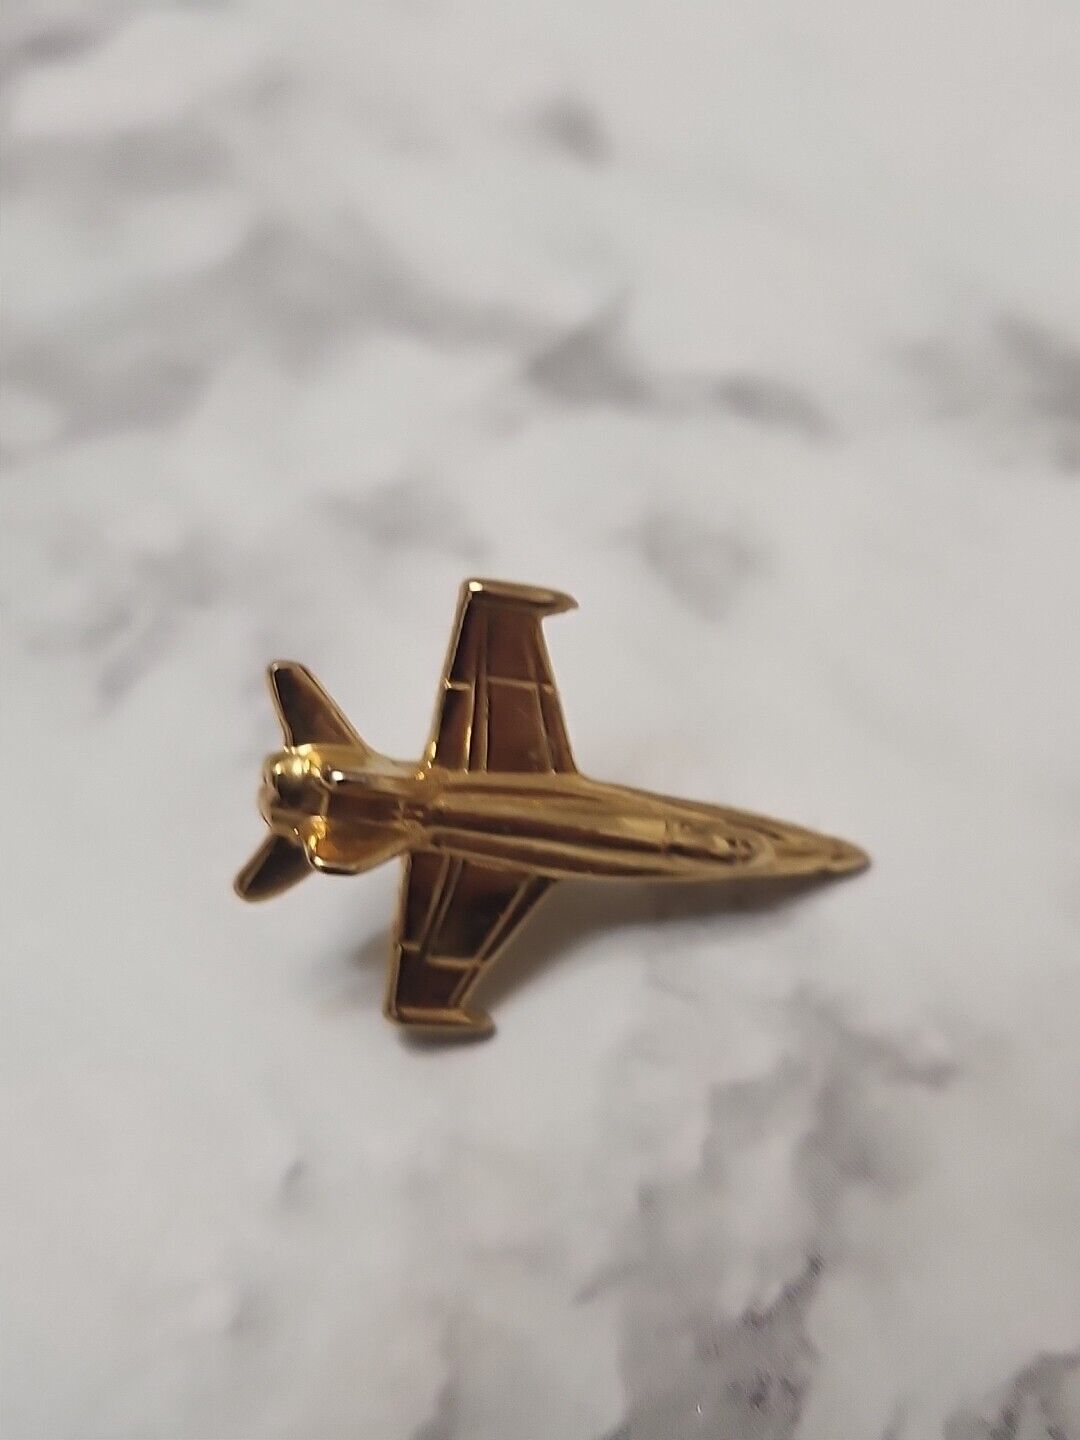 Vintage  F-16 Fighter Jet Aircraft Pin Lapel Collectible Hat Pin Tie Tack